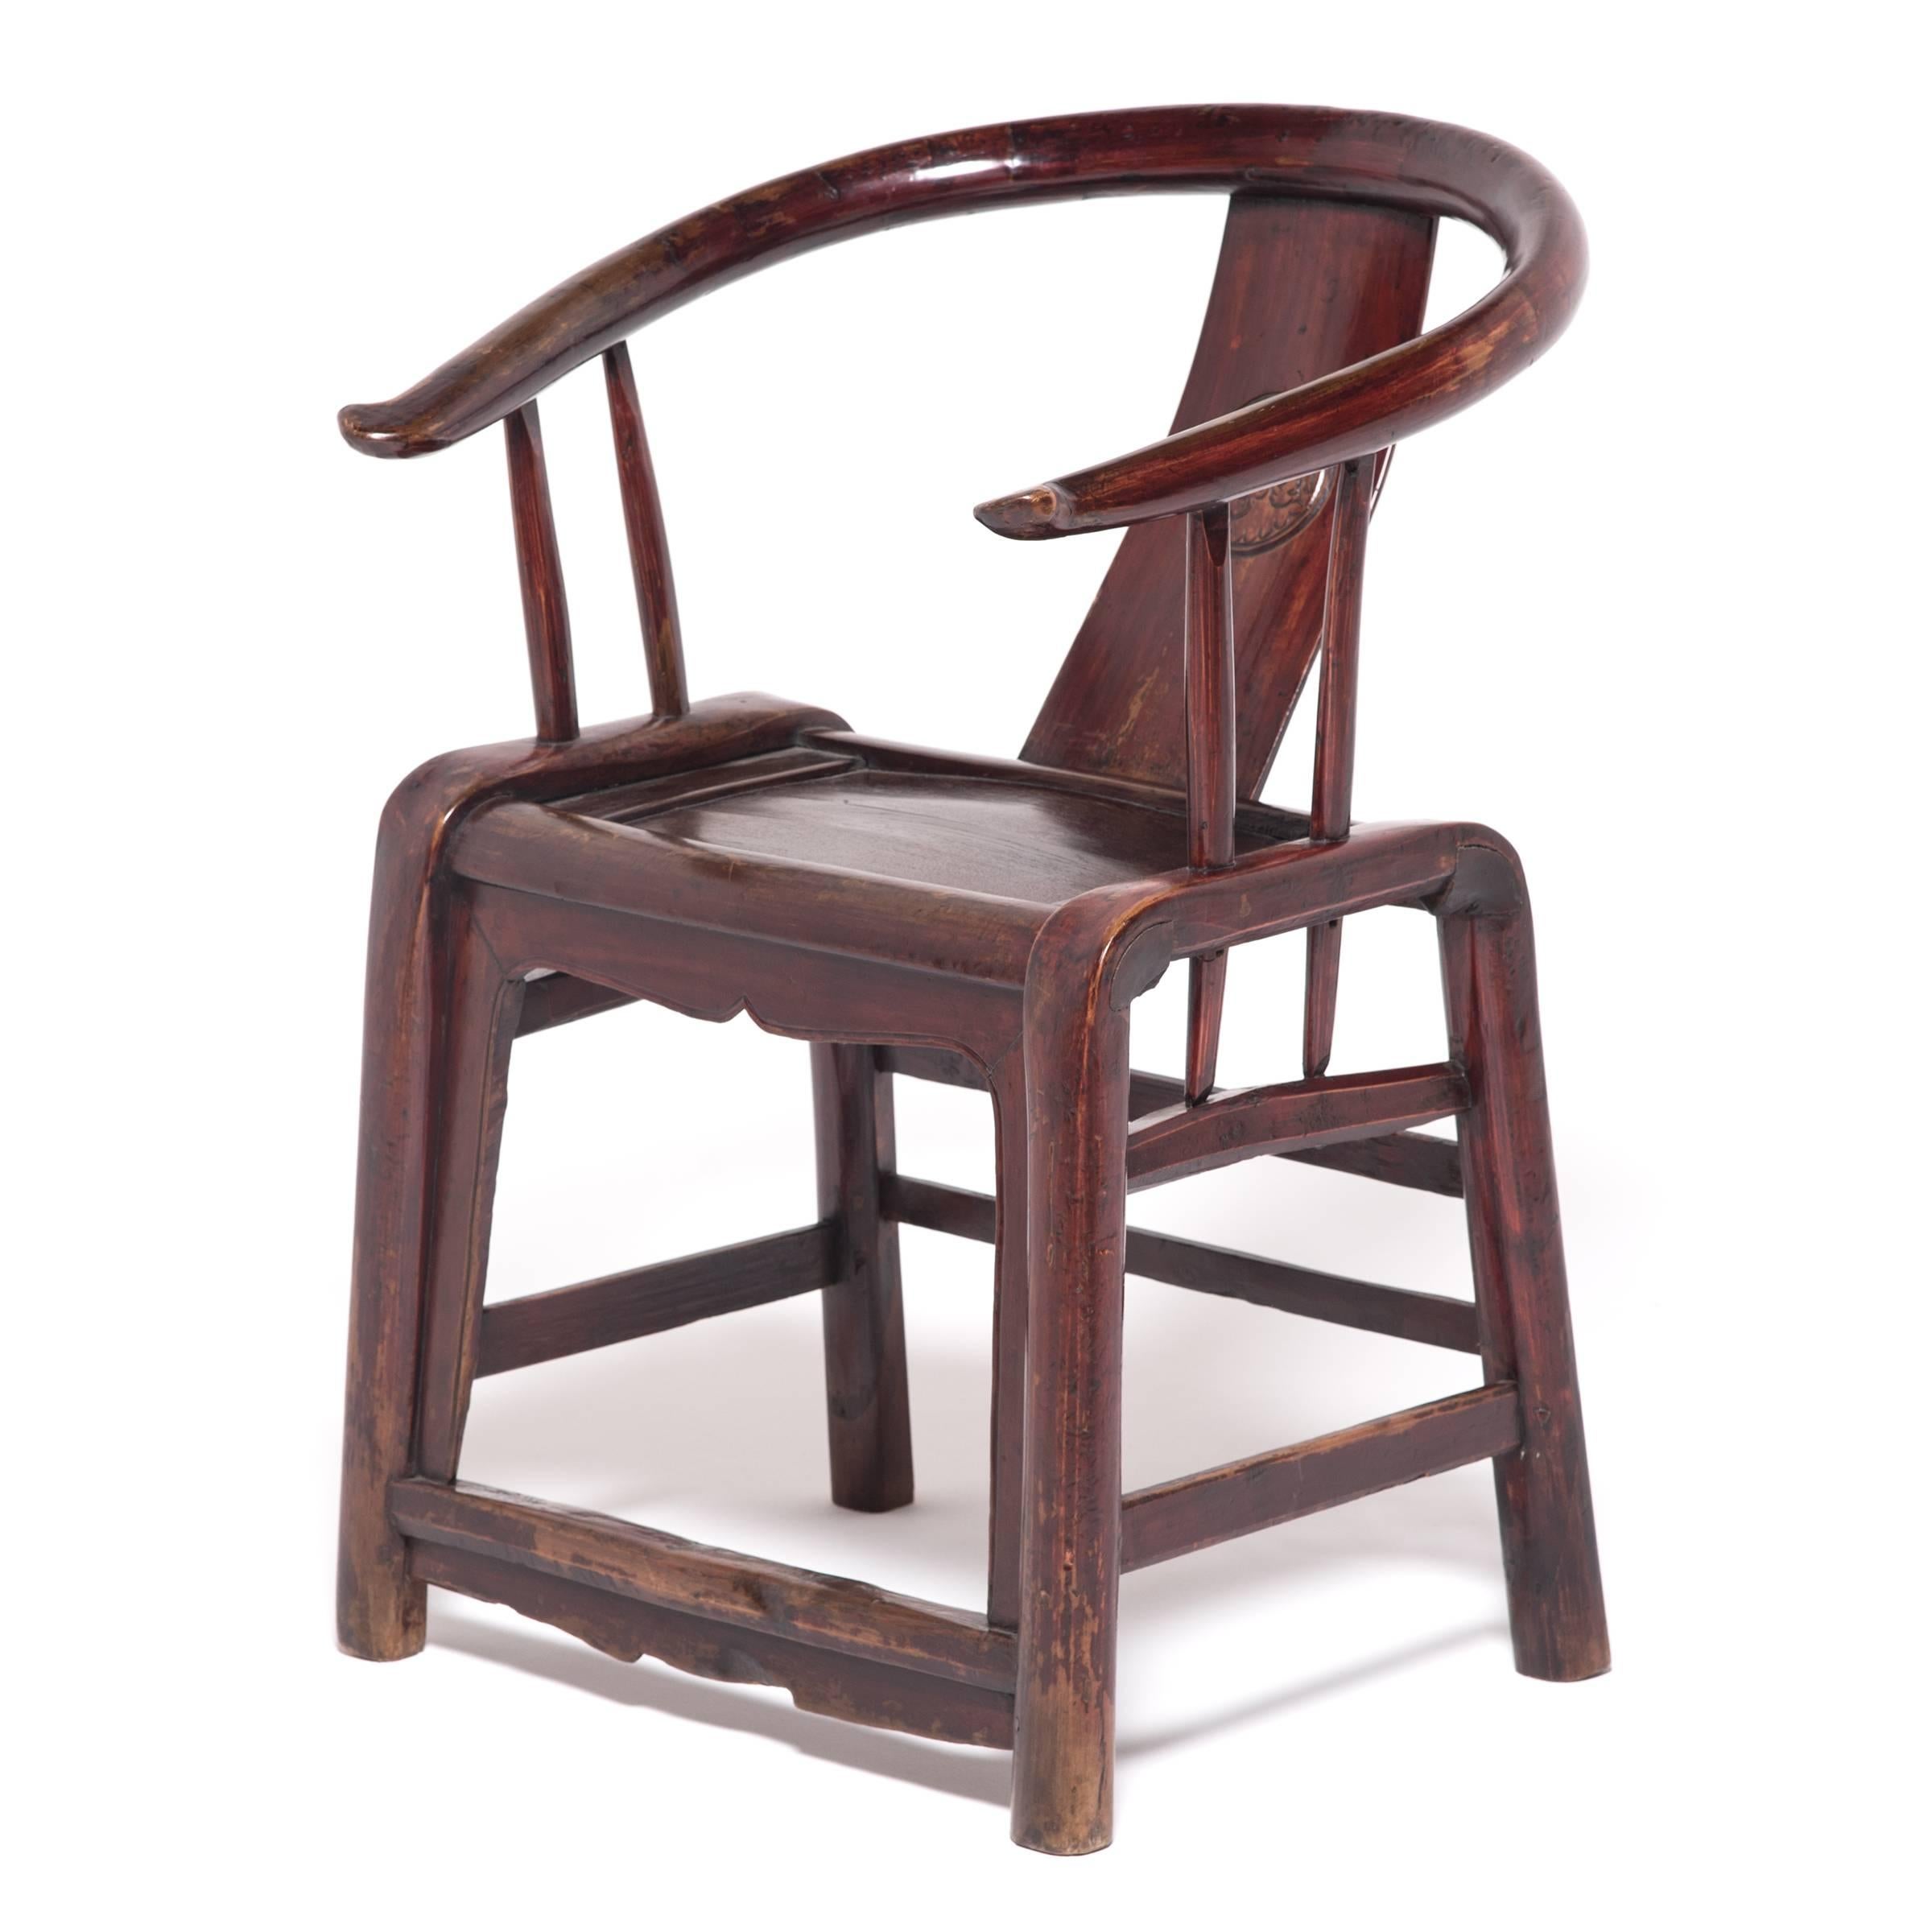 Prior to the 10th century, Chinese society eschewed raised seats in favor of mats. The rising popularity of chairs and other forms of elevated seating led craftsmen to adapt traditional cabinetry and architecture techniques to the human body. In the